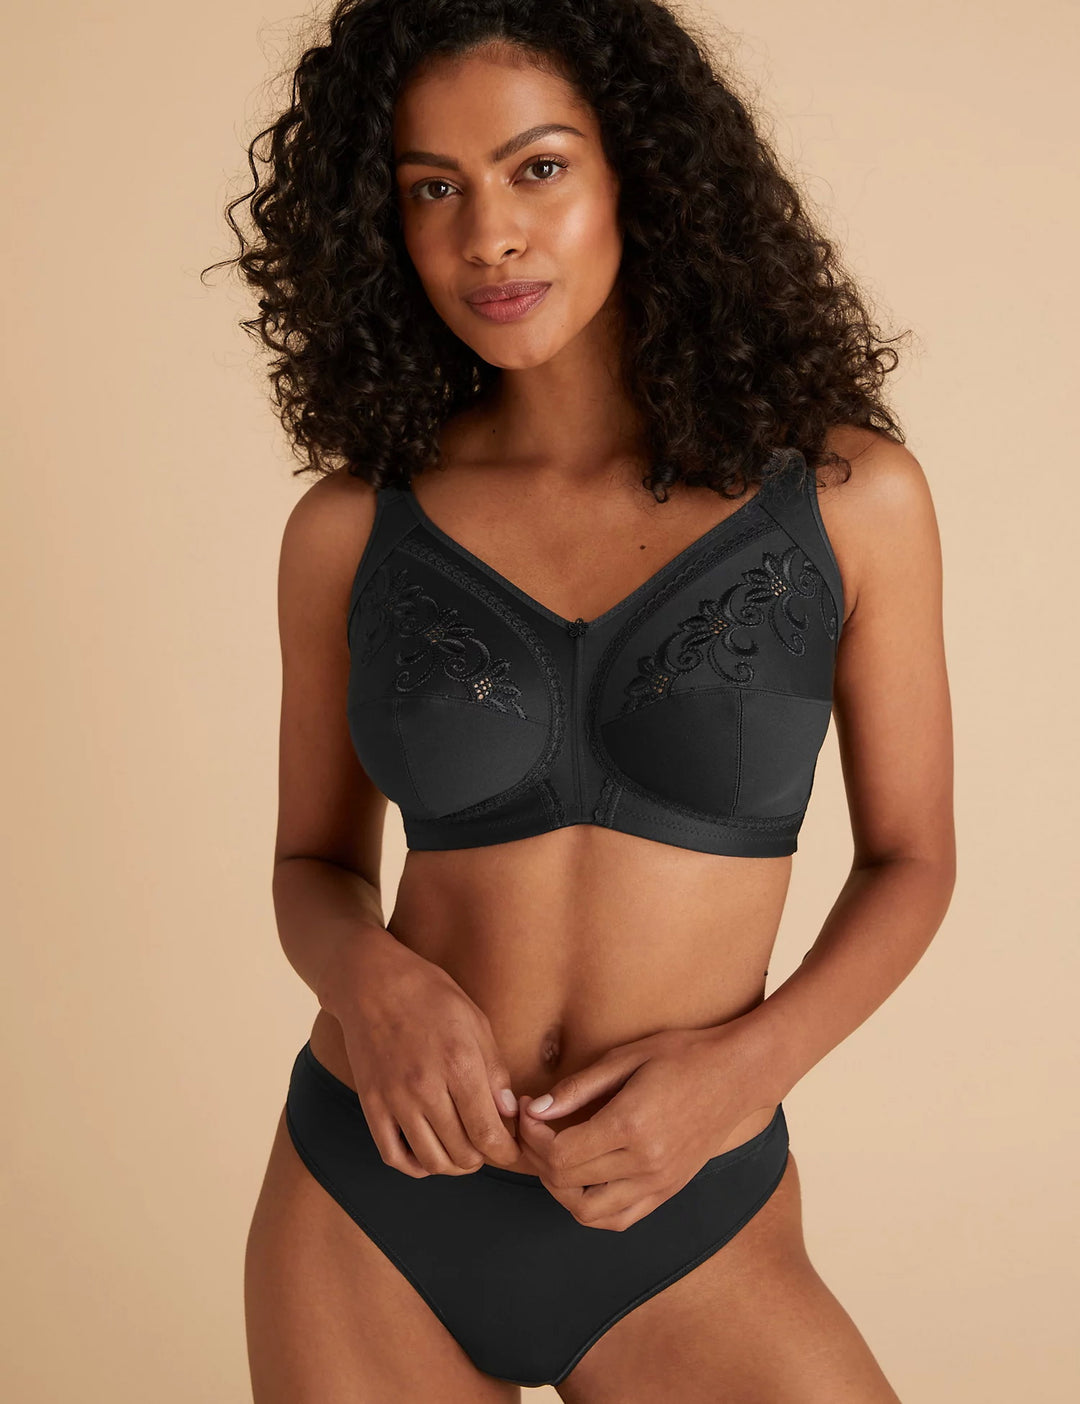 M&S Bra Total Support Non-Wired Full Cup T33/07434/8020 (Black)